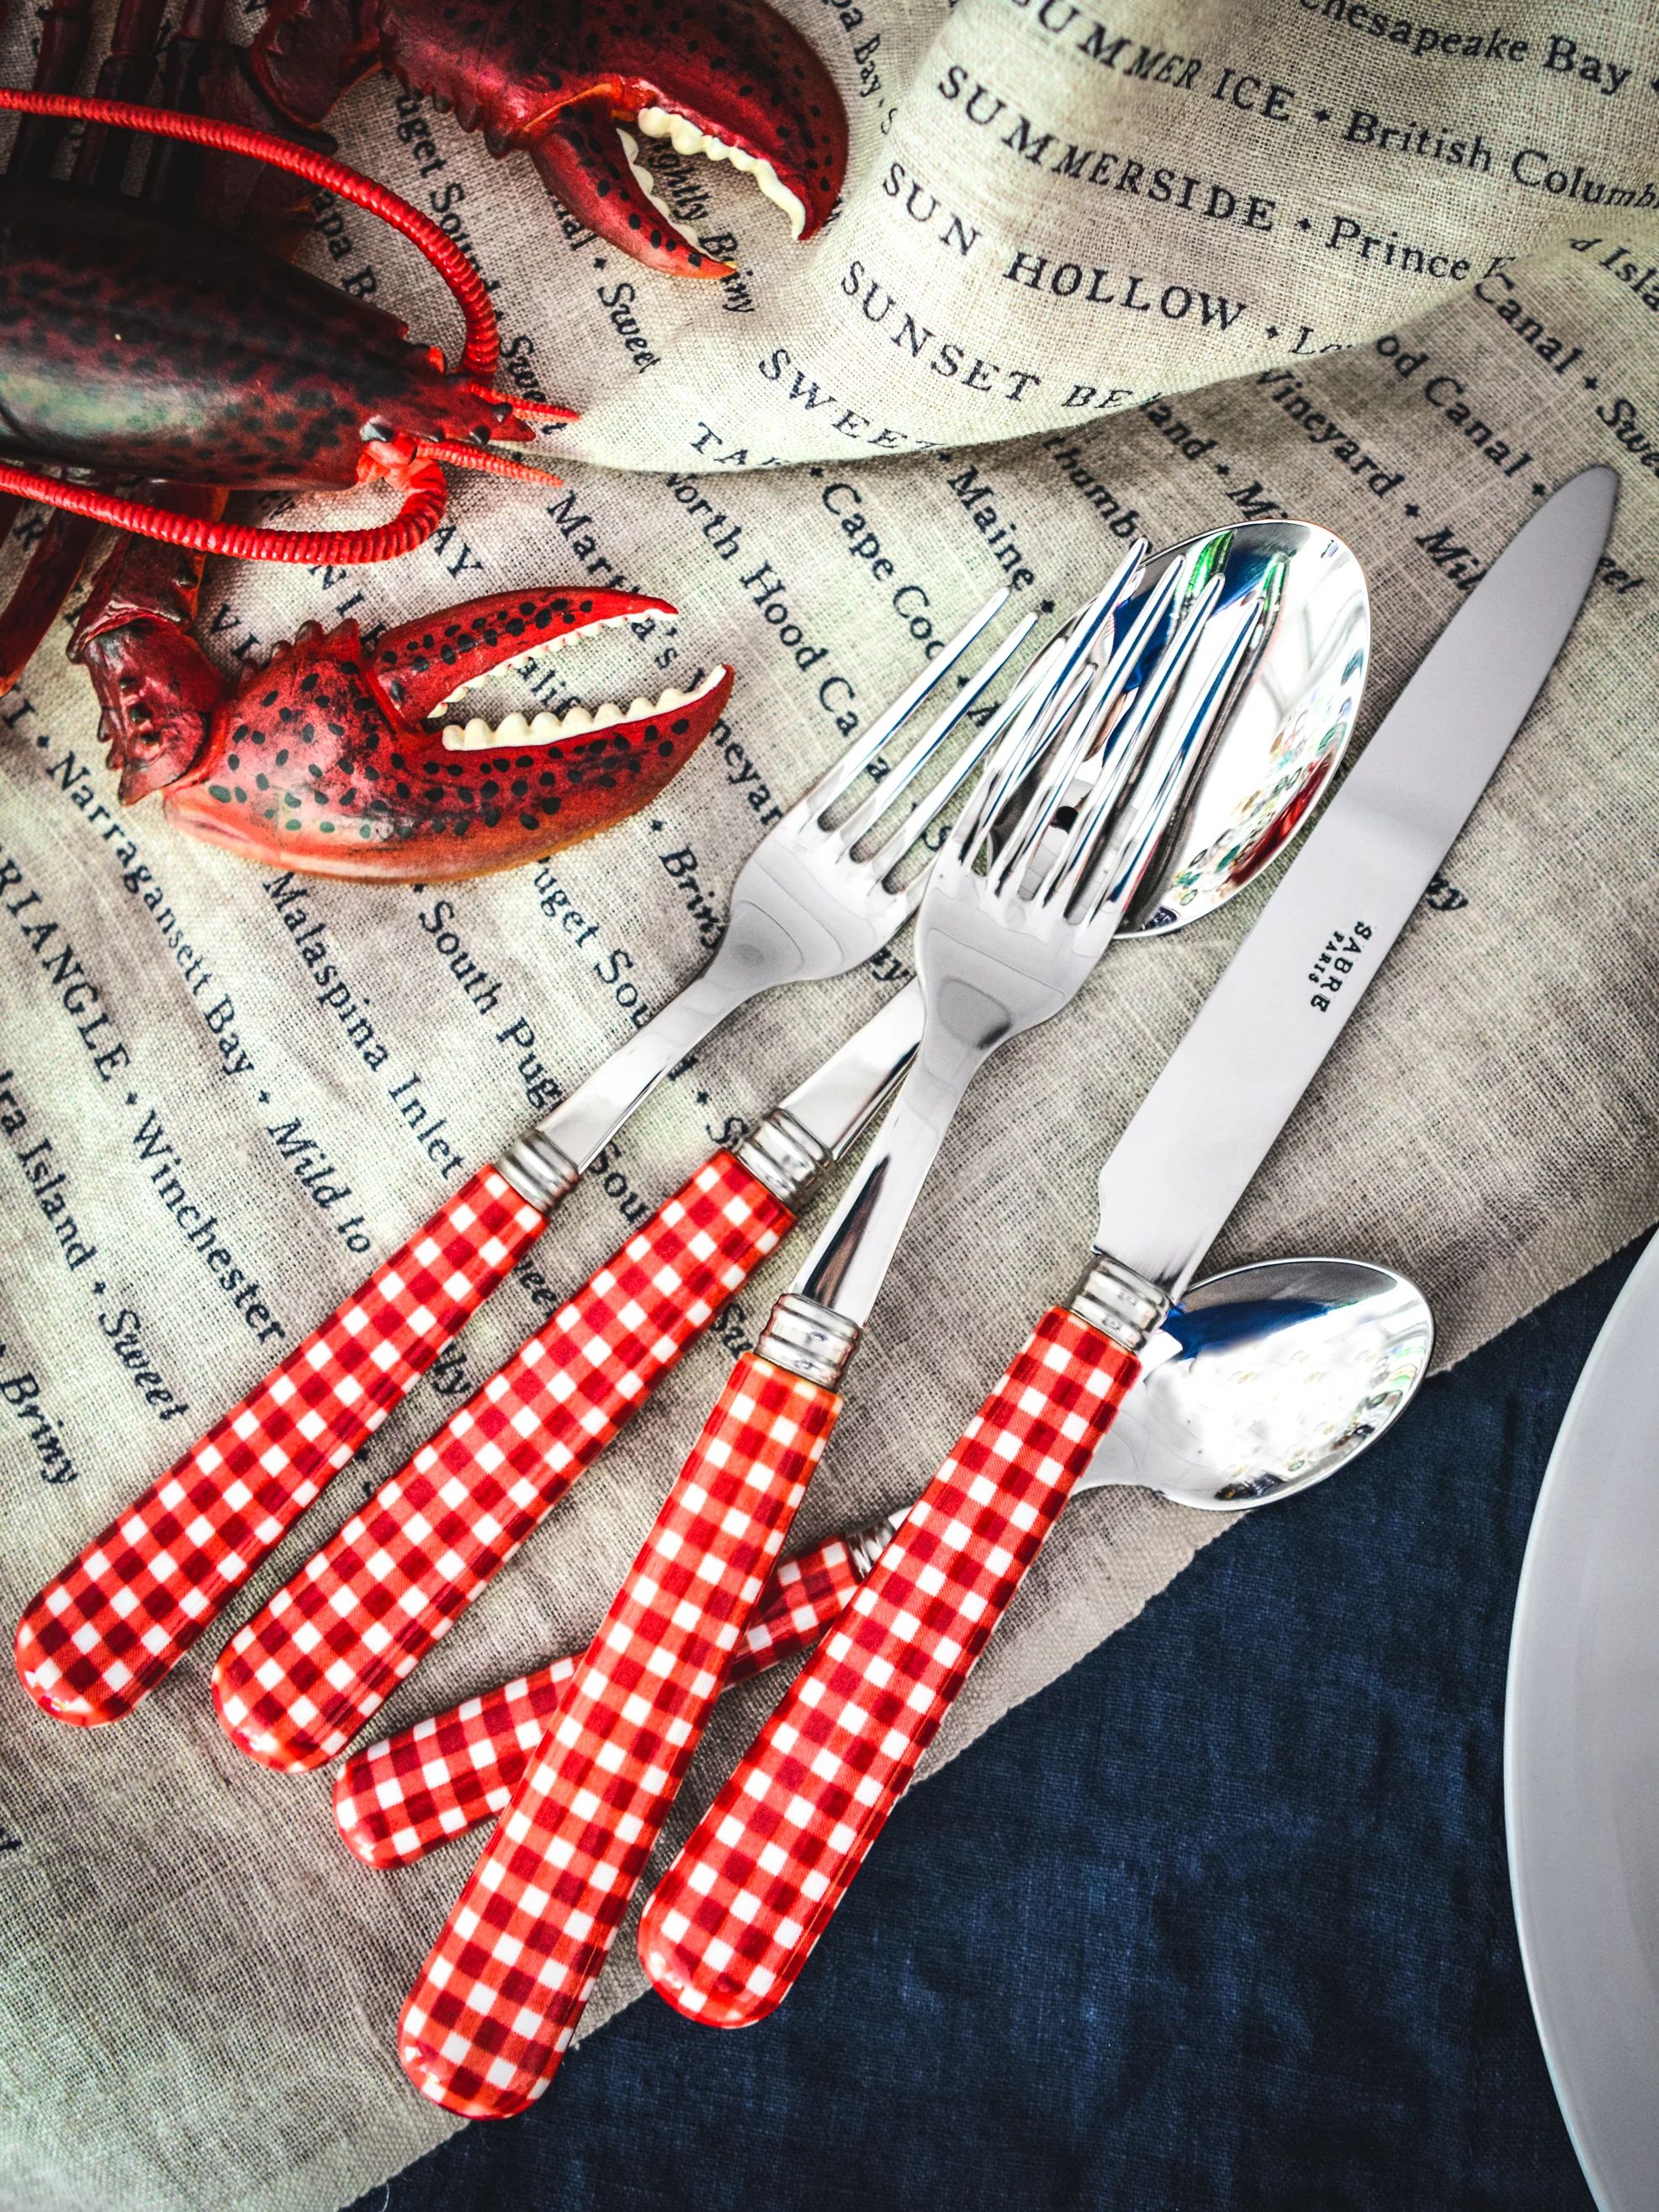 Sabre Paris Gingham Red 5 Piece Place Setting | Weston Table